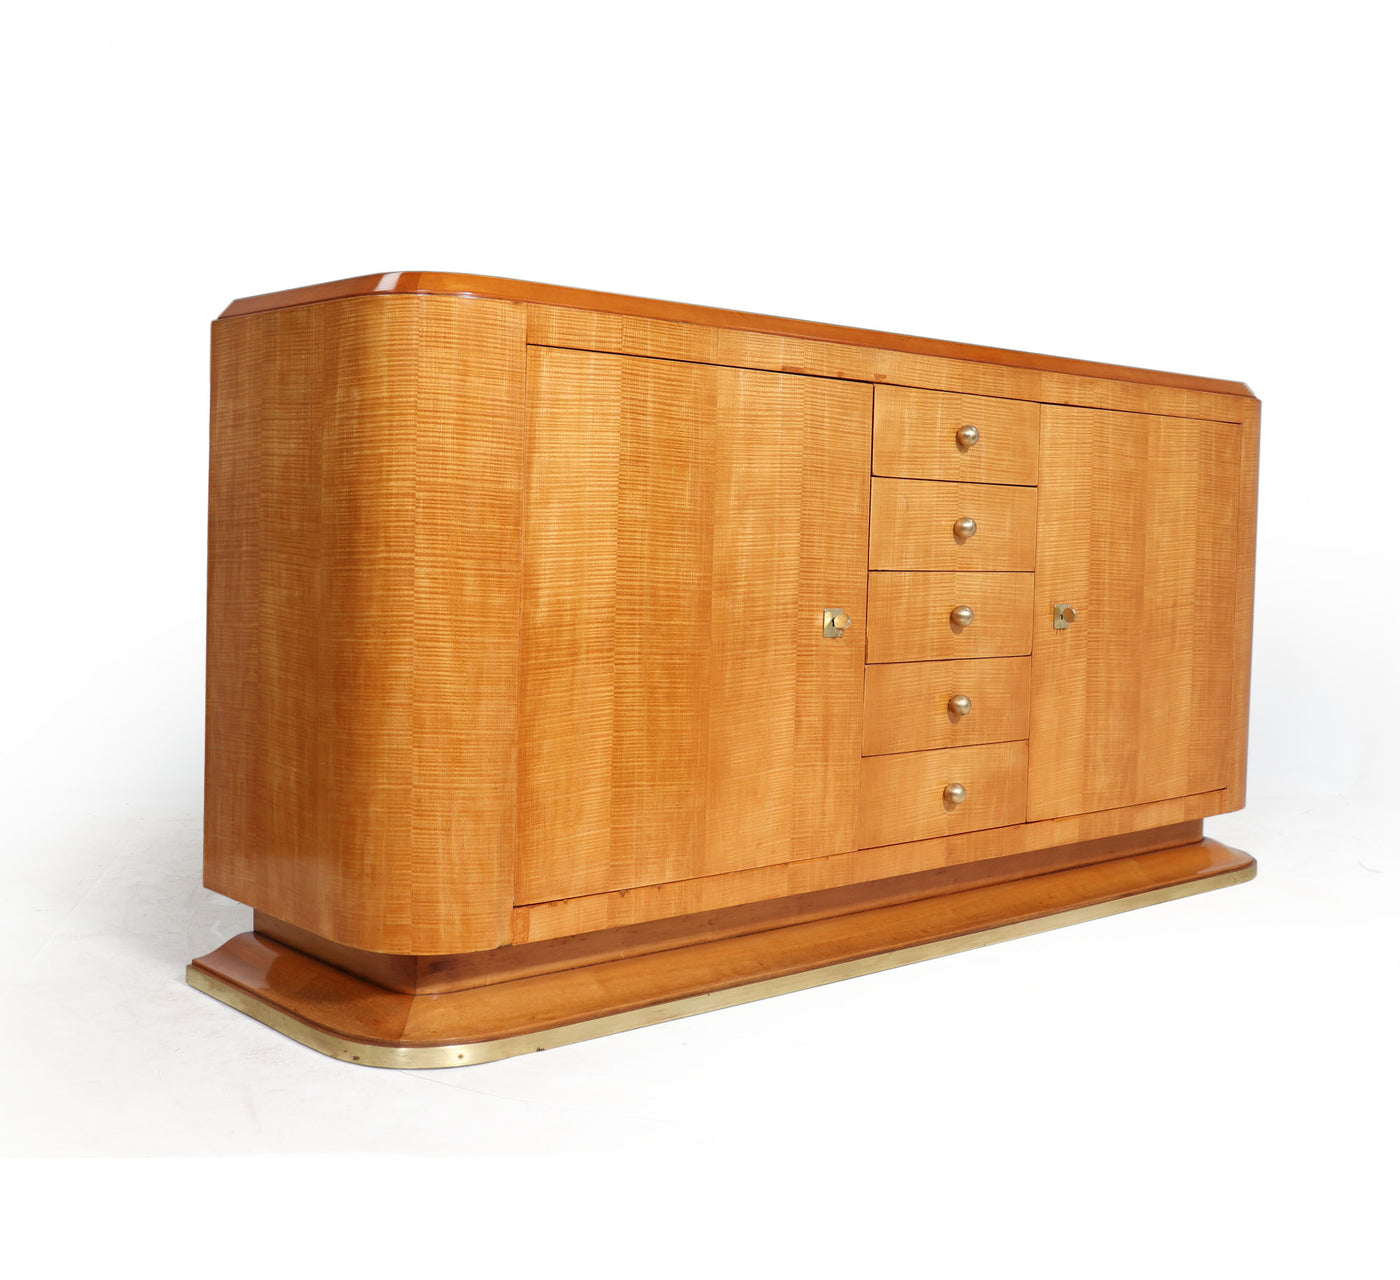 French Art Deco Sideboard in Sycamore side